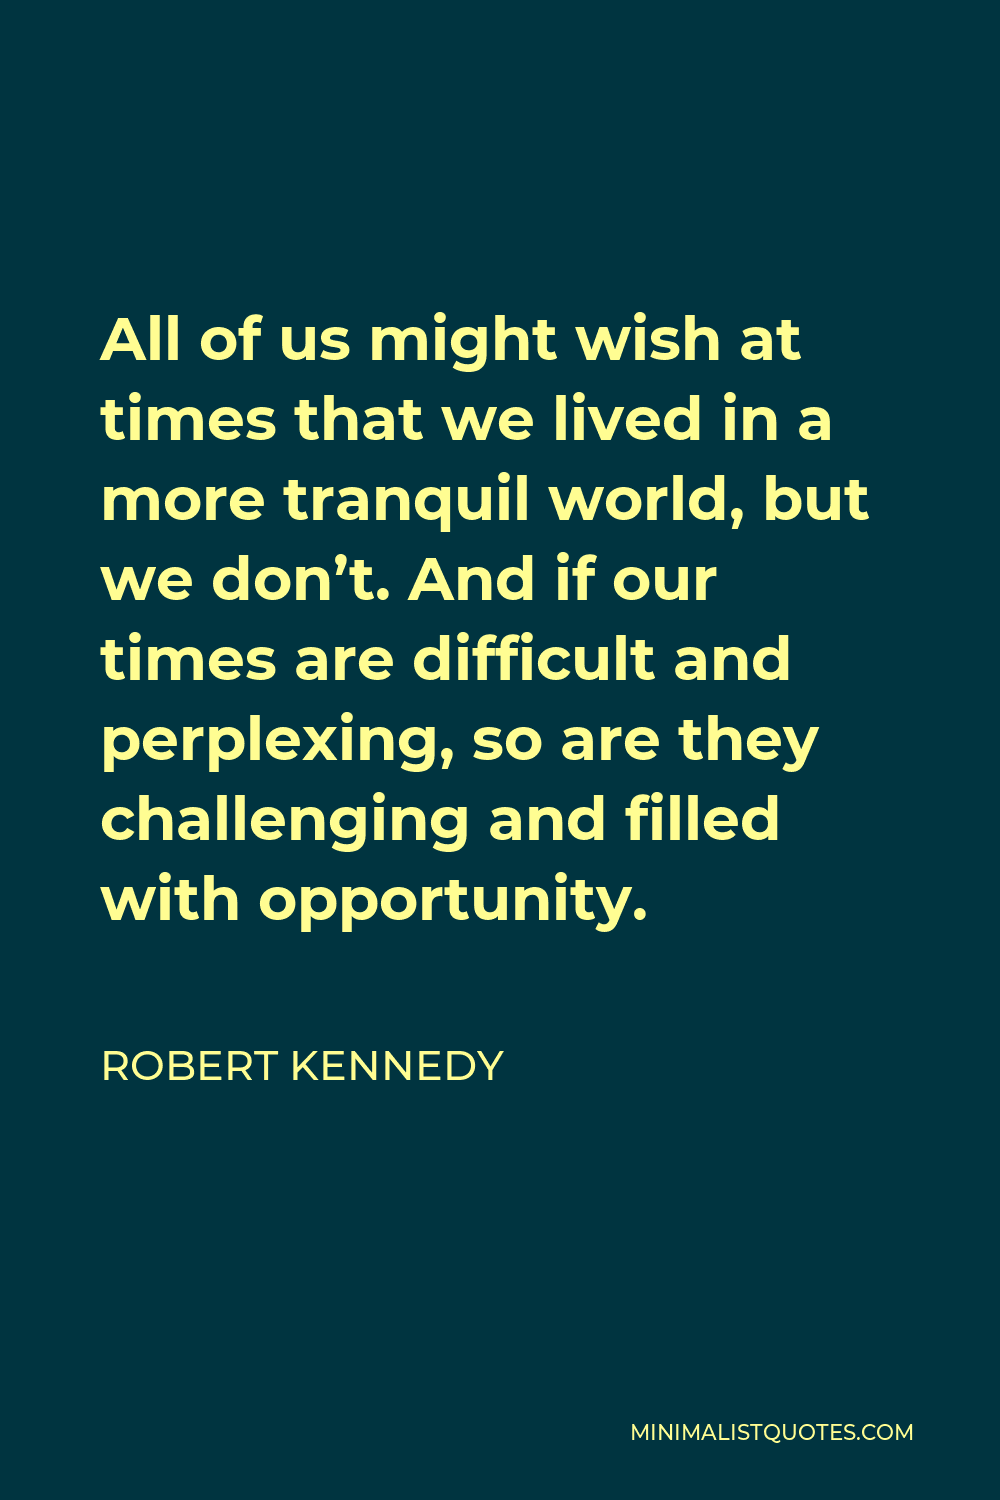 Robert Kennedy Quote - All of us might wish at times that we lived in a more tranquil world, but we don’t. And if our times are difficult and perplexing, so are they challenging and filled with opportunity.